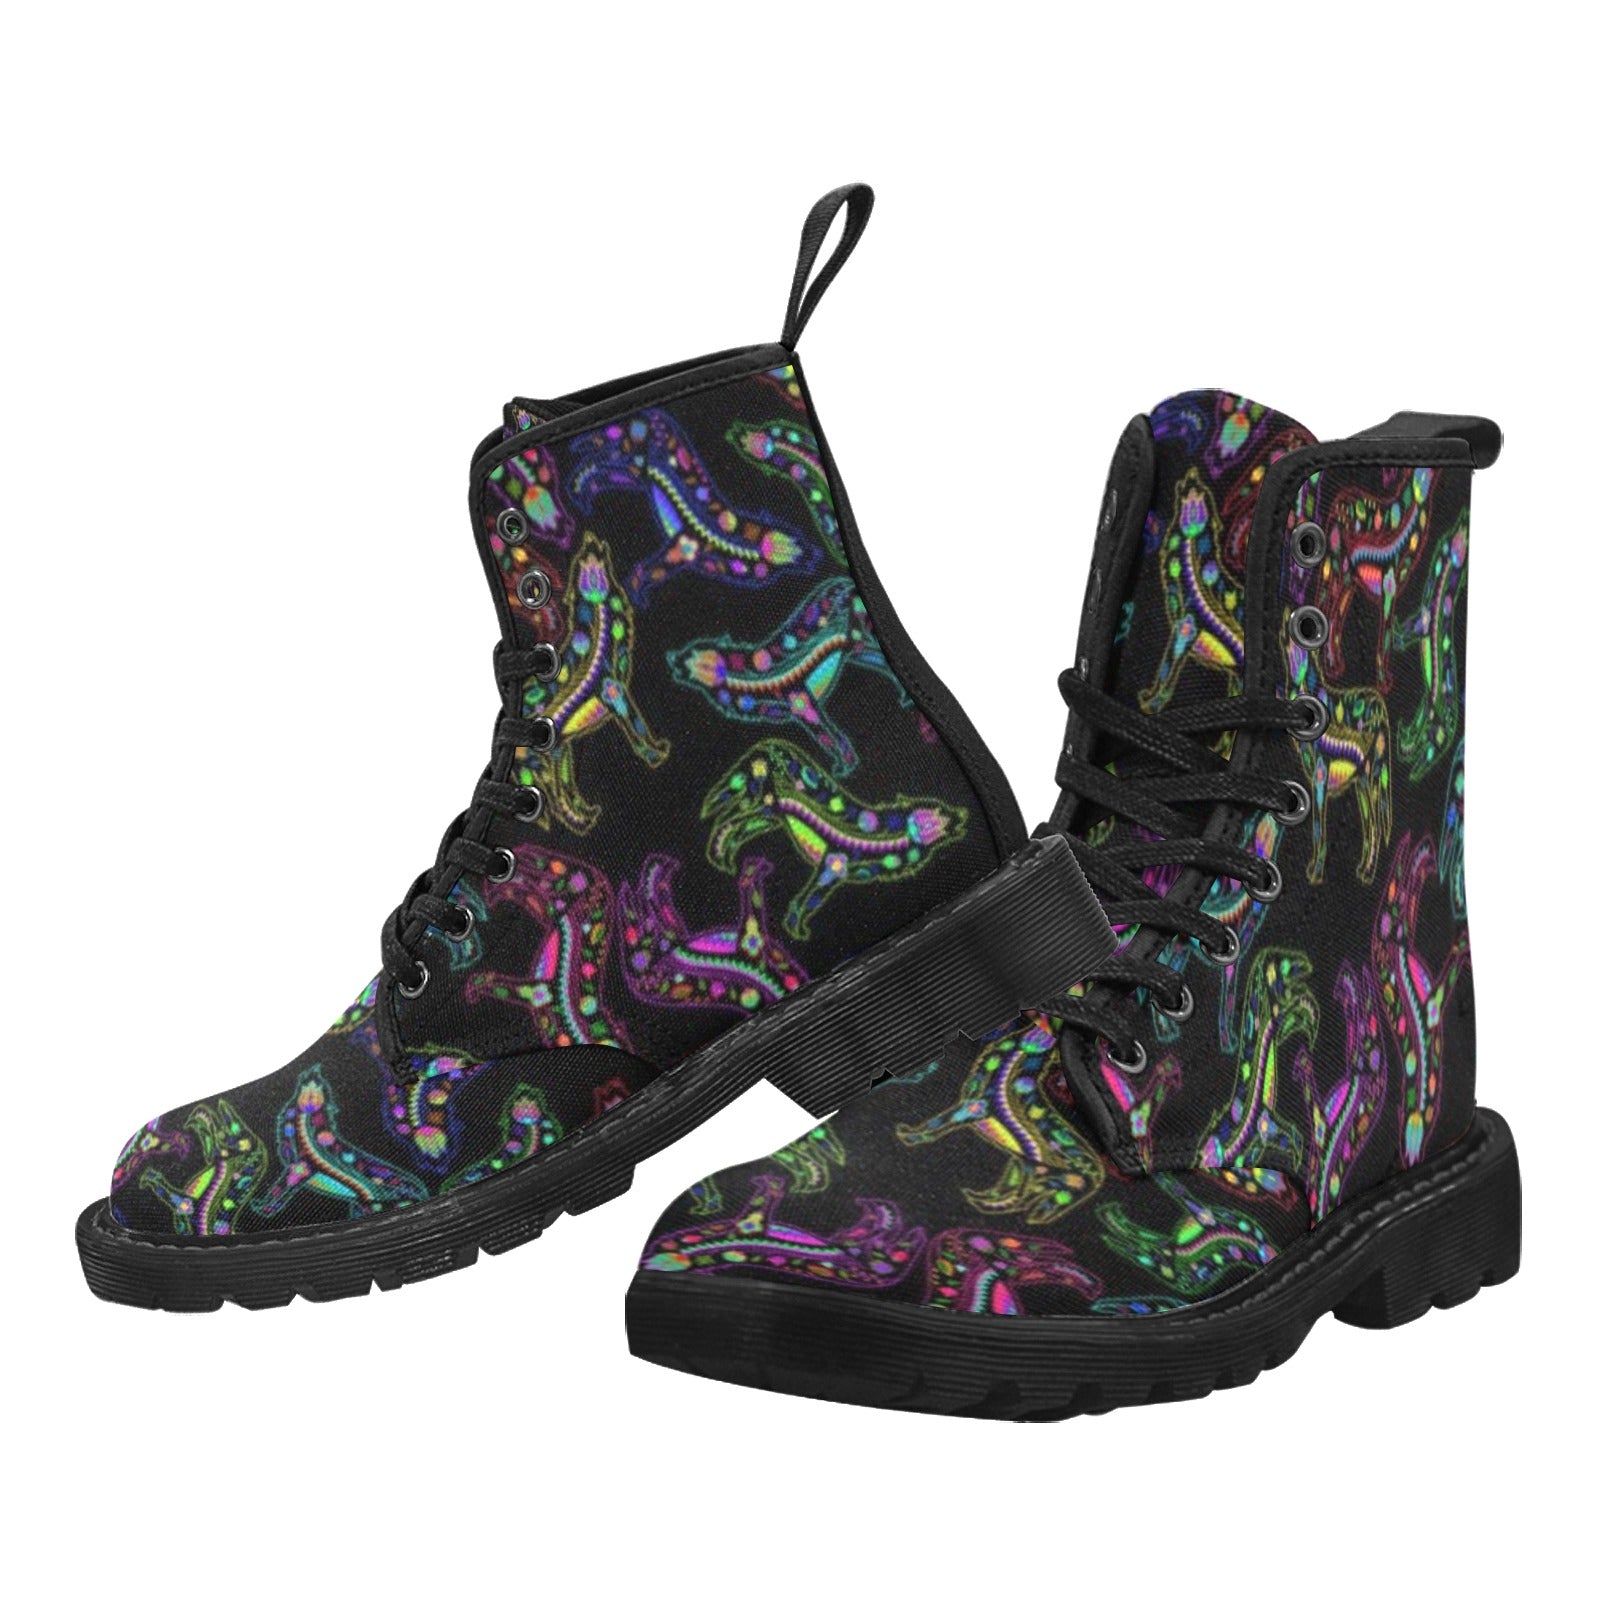 Neon Floral Wolves Boots for Women (Black)